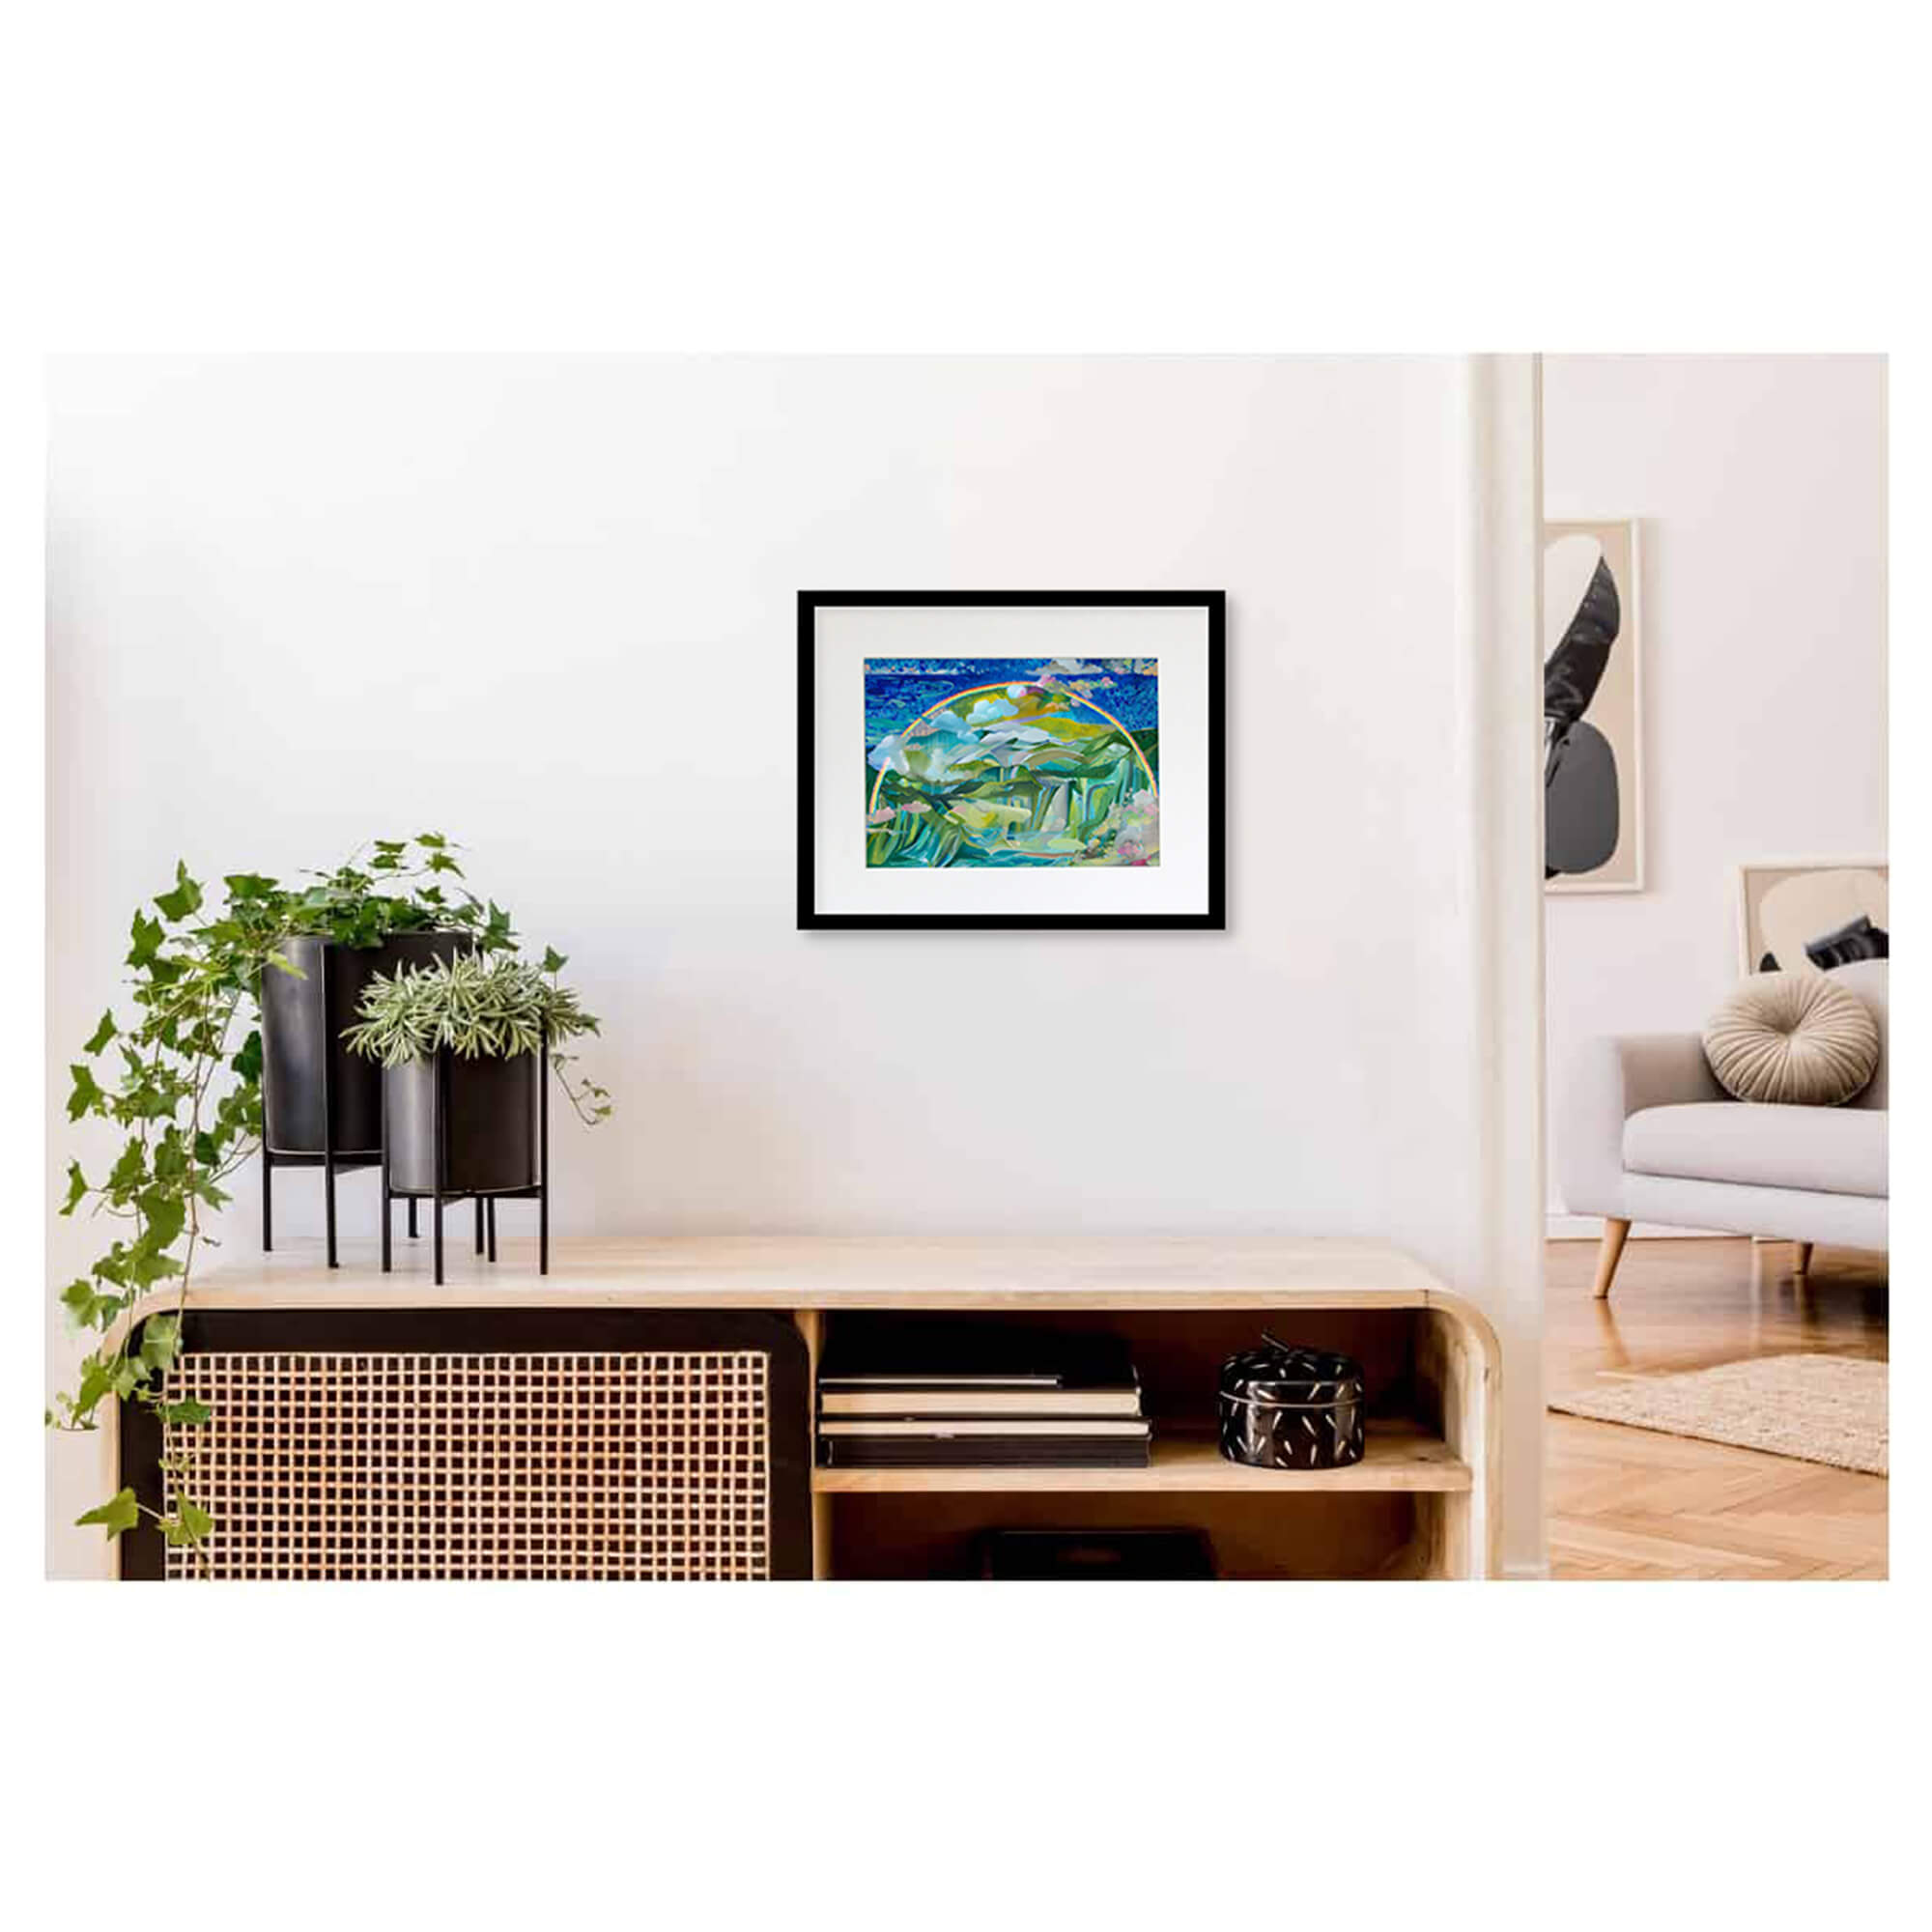 Framed matted art print of an abstract landscape with a rainbow over the mountains by Hawaii artist Saumolia Puapuaga